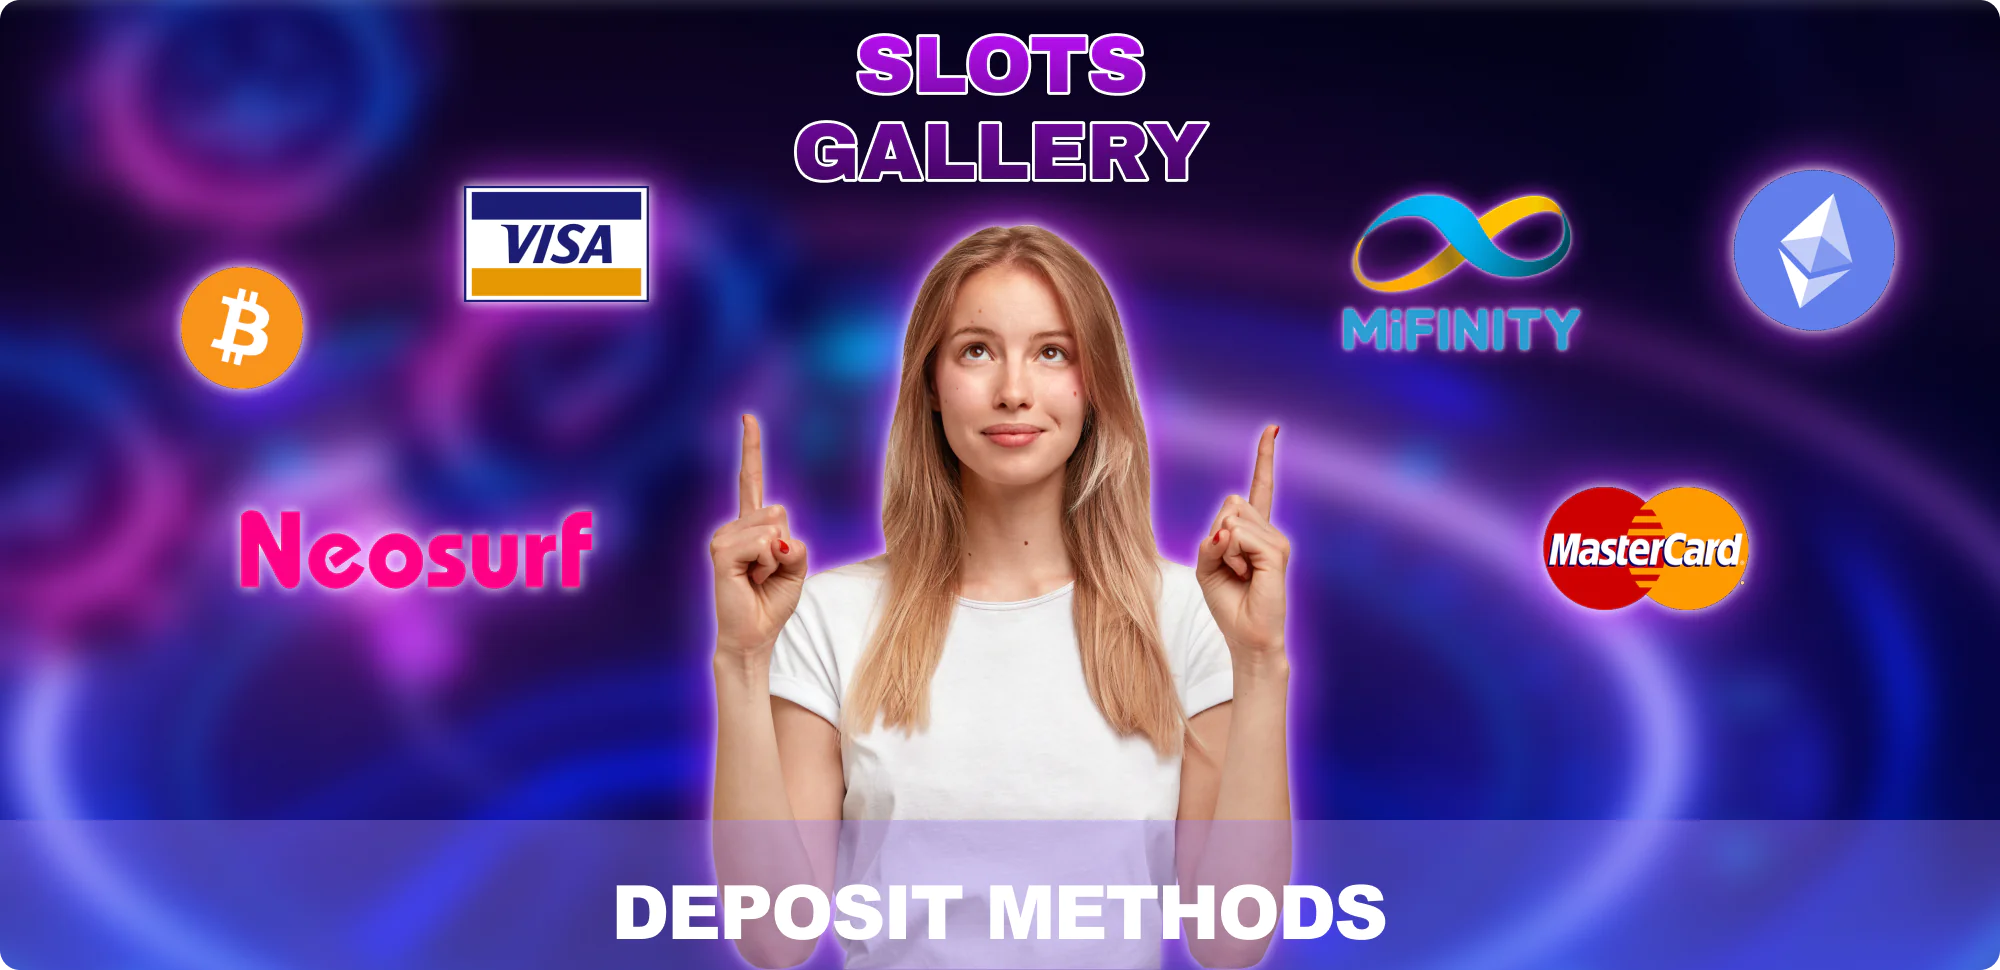 Slots Gallery Canada - Methods for replenishing your balance